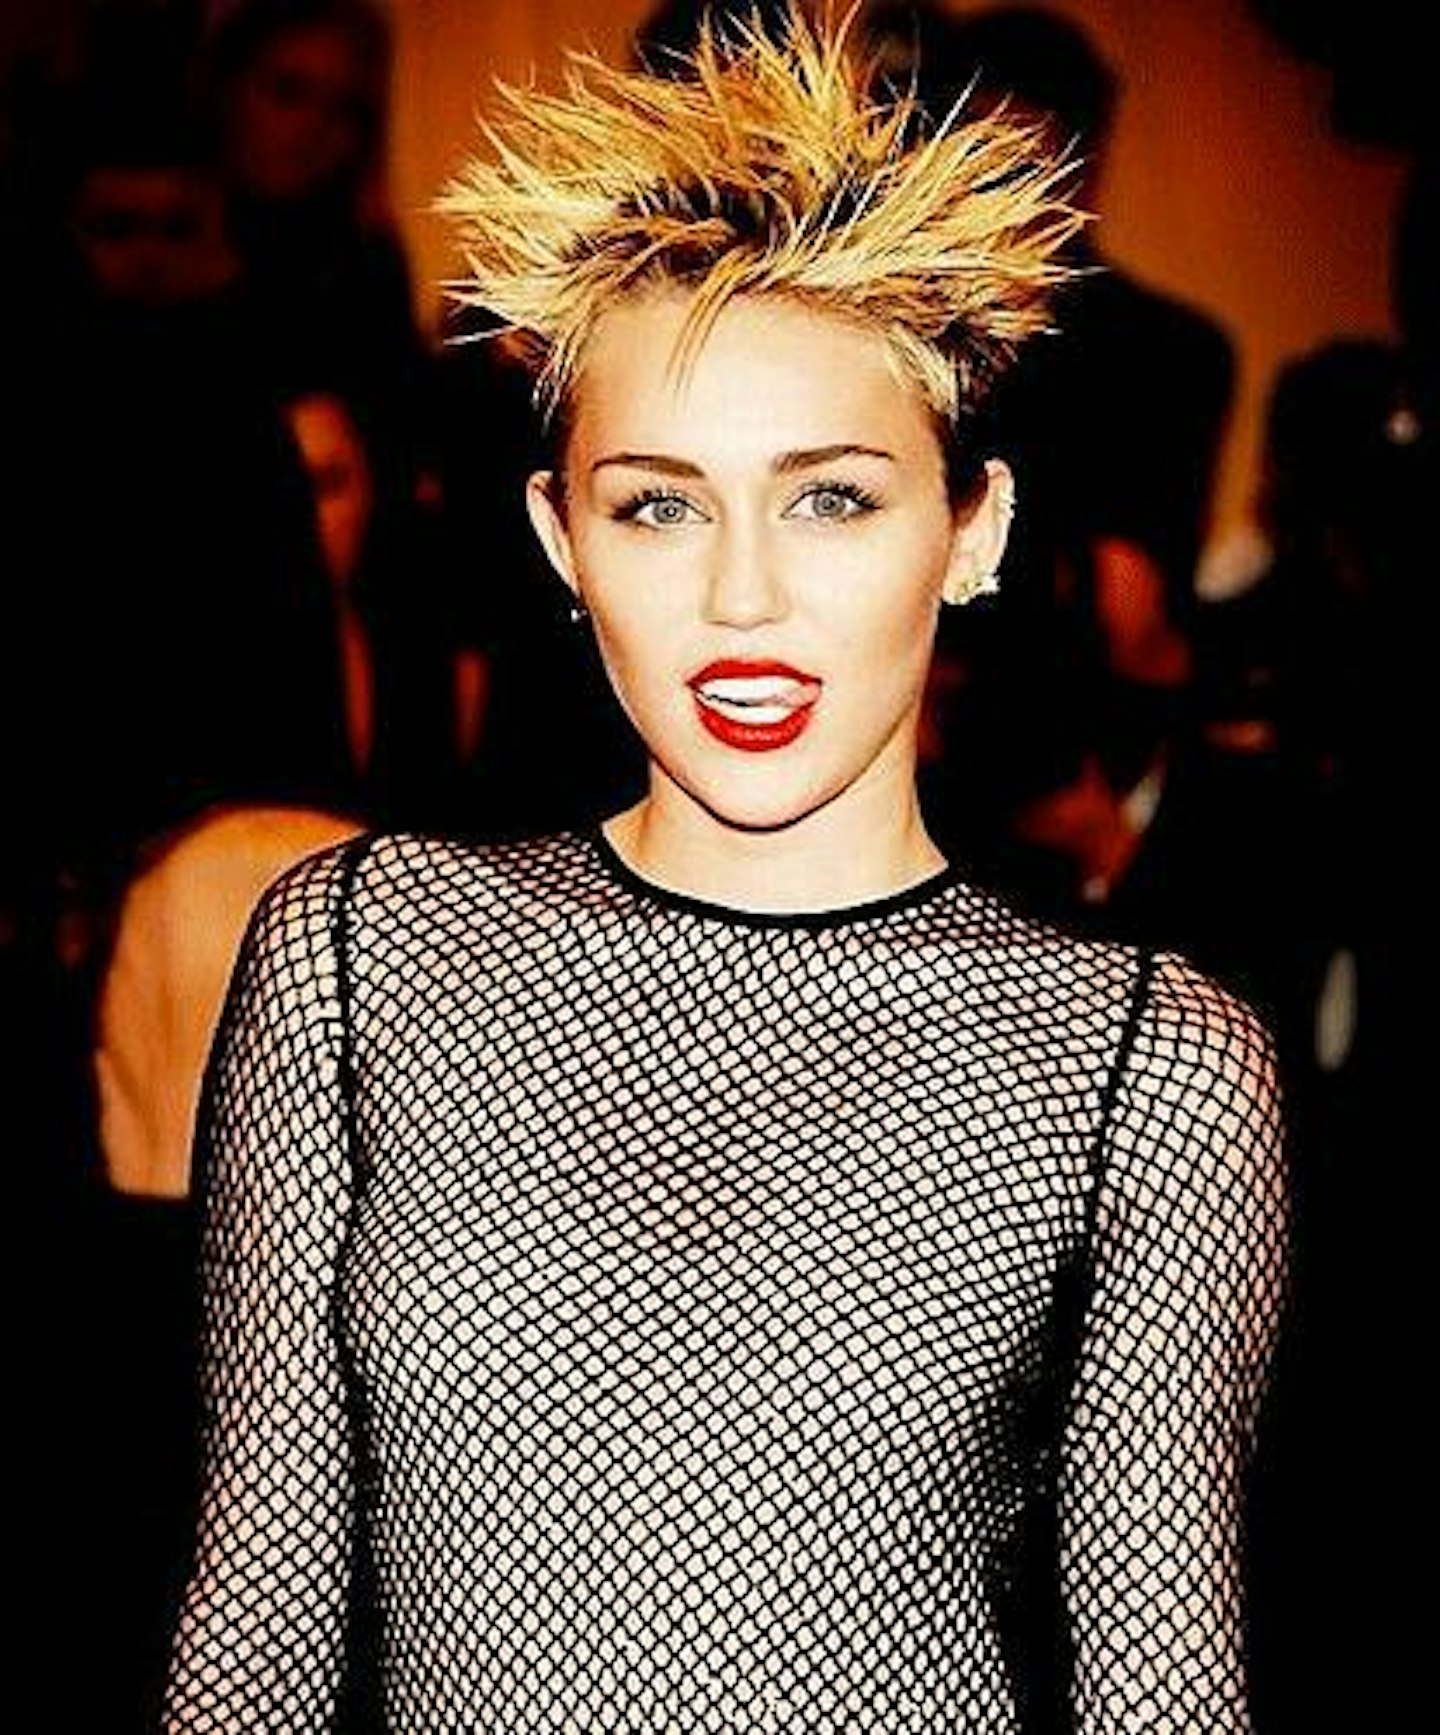 Miley Cyrus punk'd up her look for the Met Ball